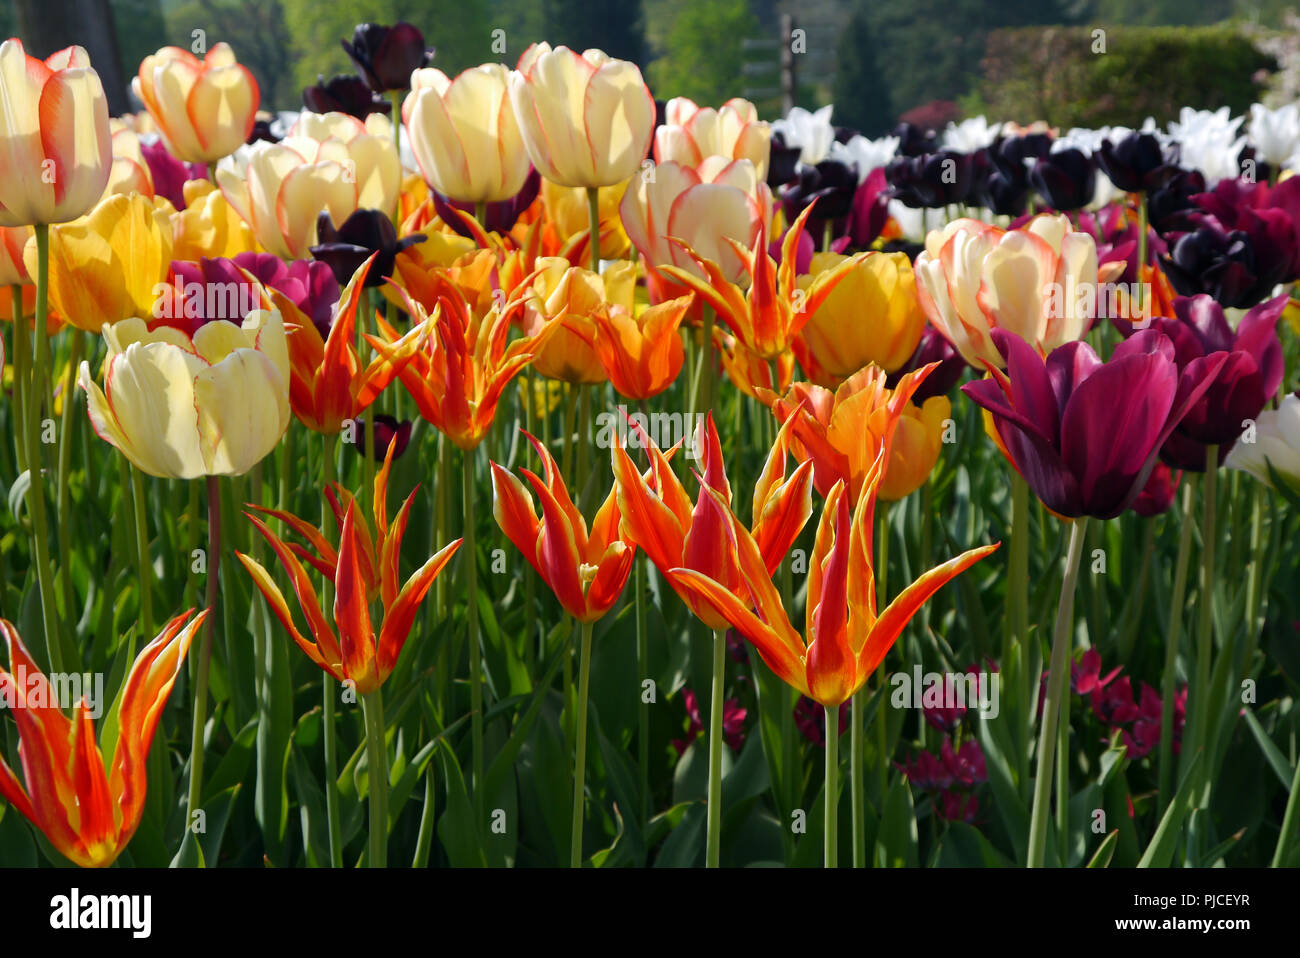 A Colourful Border of Mixed Tulips on Display at RHS Garden Harlow Carr, Harrogate, Yorkshire. England, UK. Stock Photo